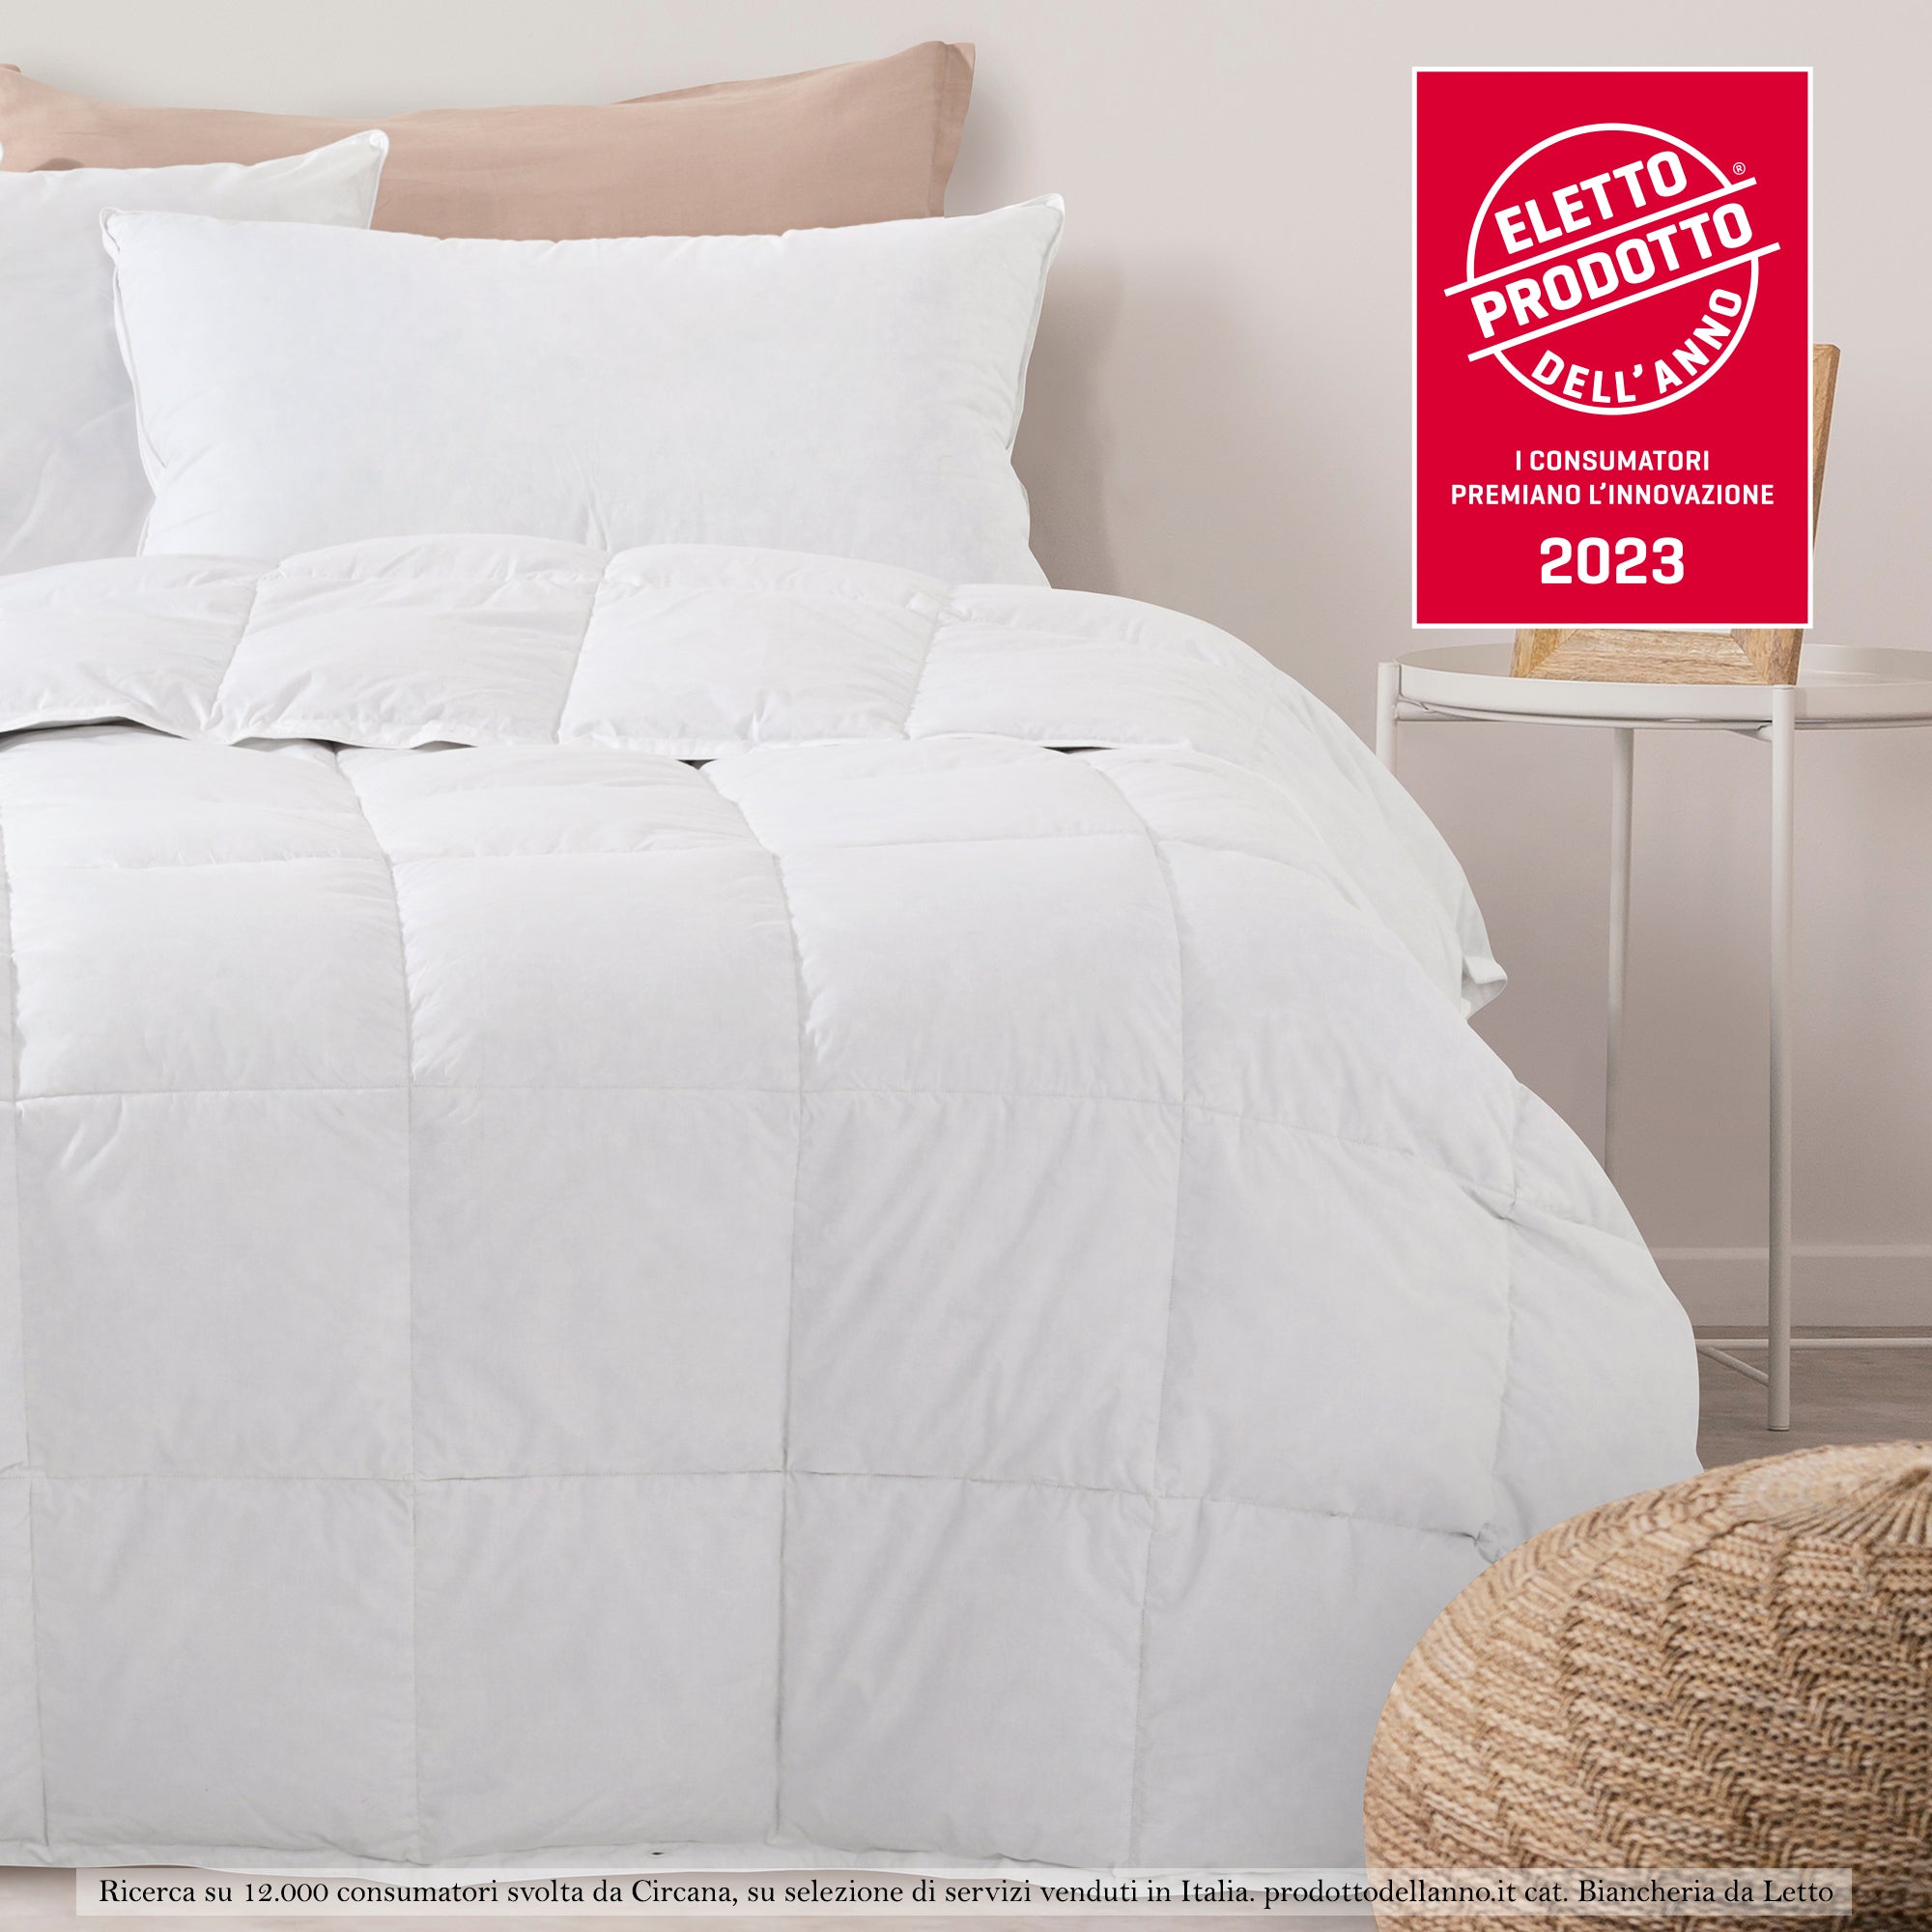 Polar 3* Autumn Duvet in 100% Goose Down | Elected Product of the Year 2023